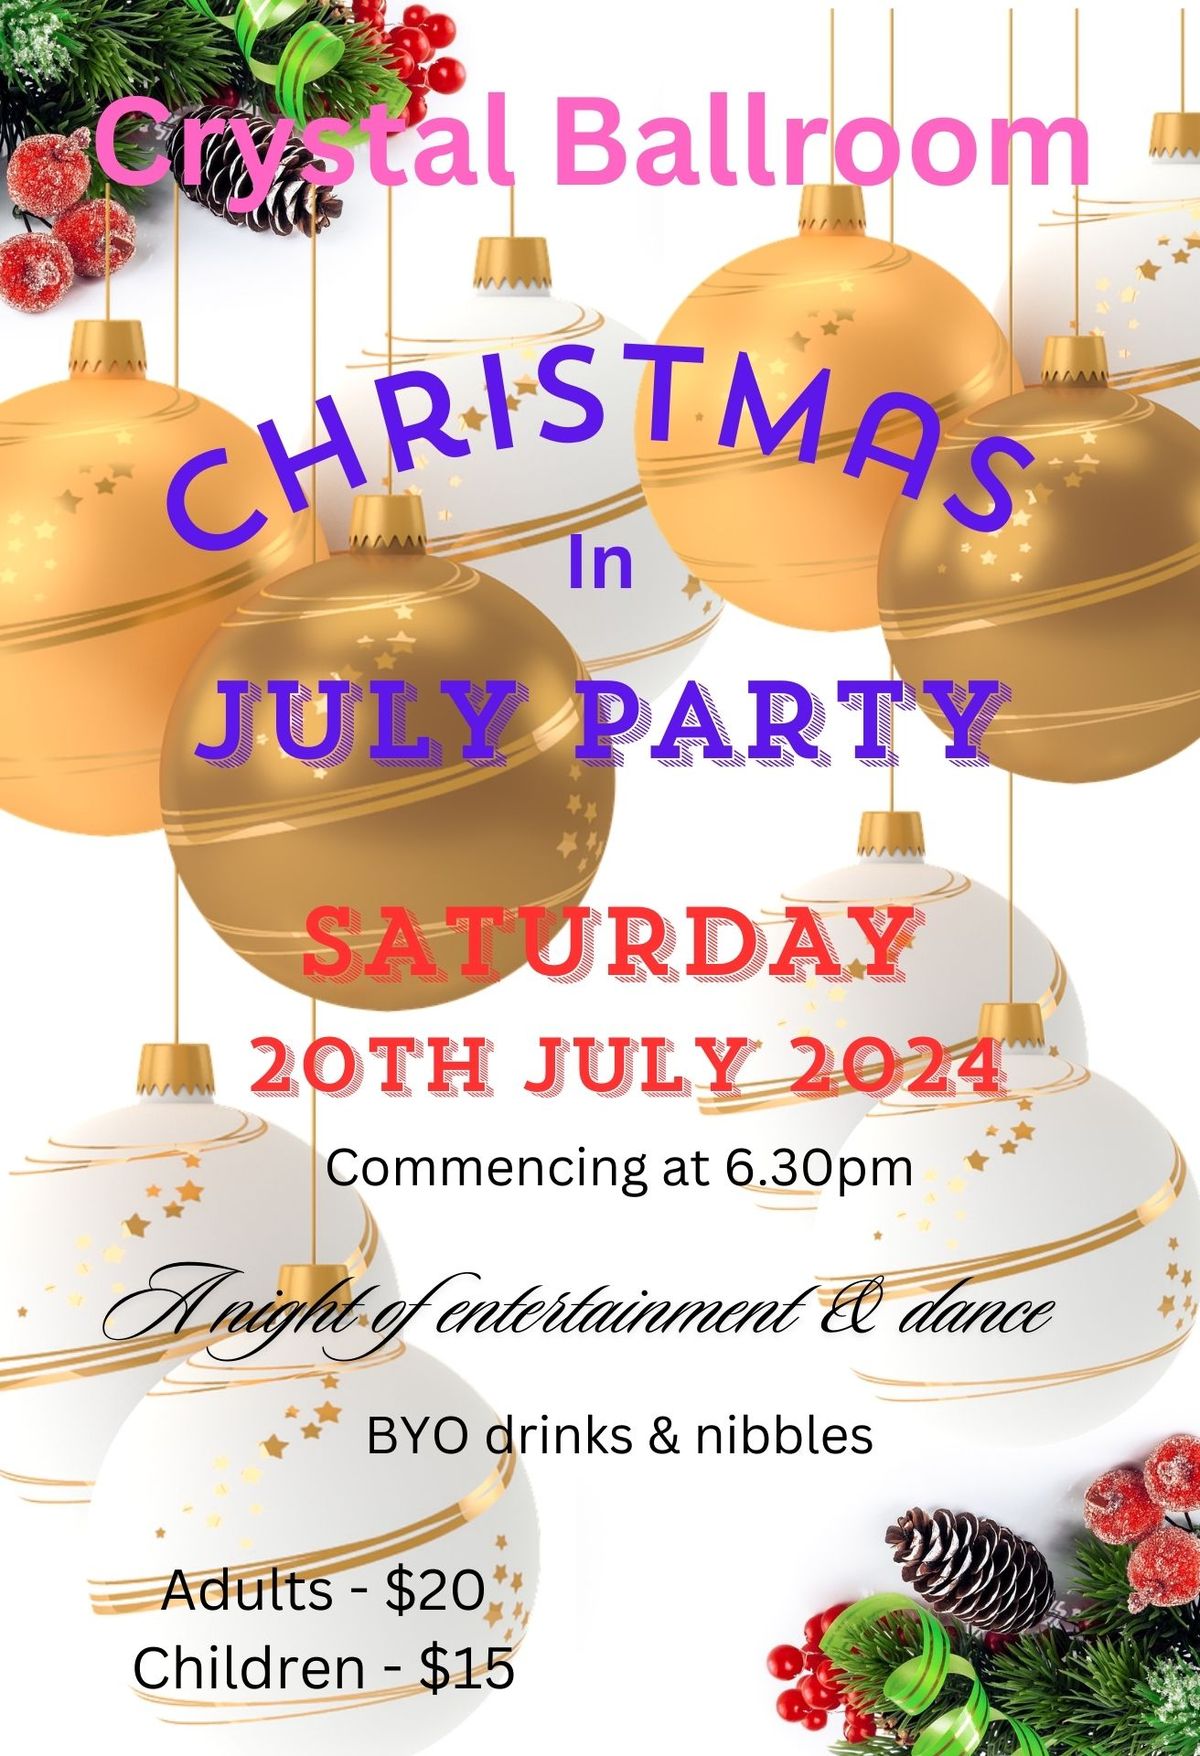 Crystal Ballroom Christmas In July Party